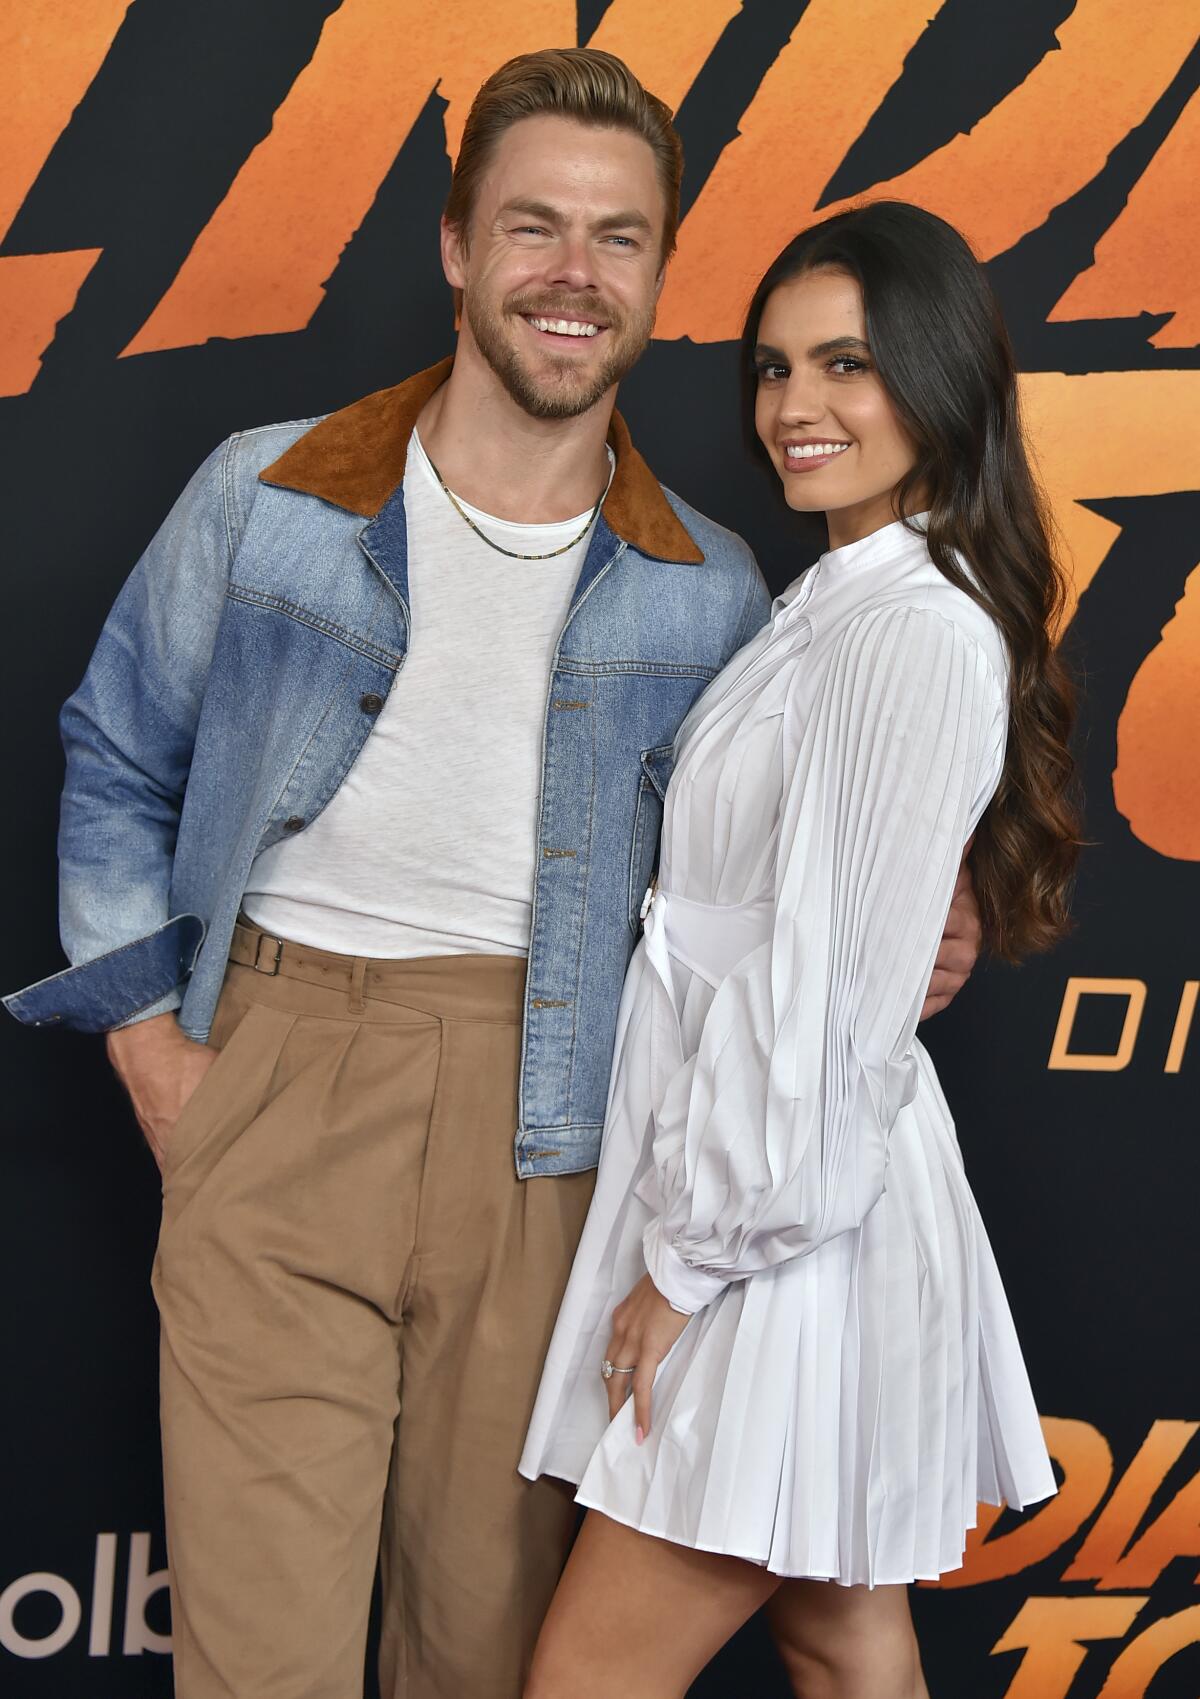 Derek Hough dressed in denim jacket poses next to Hayley Erbert in a white dress as the pair embrace and smile